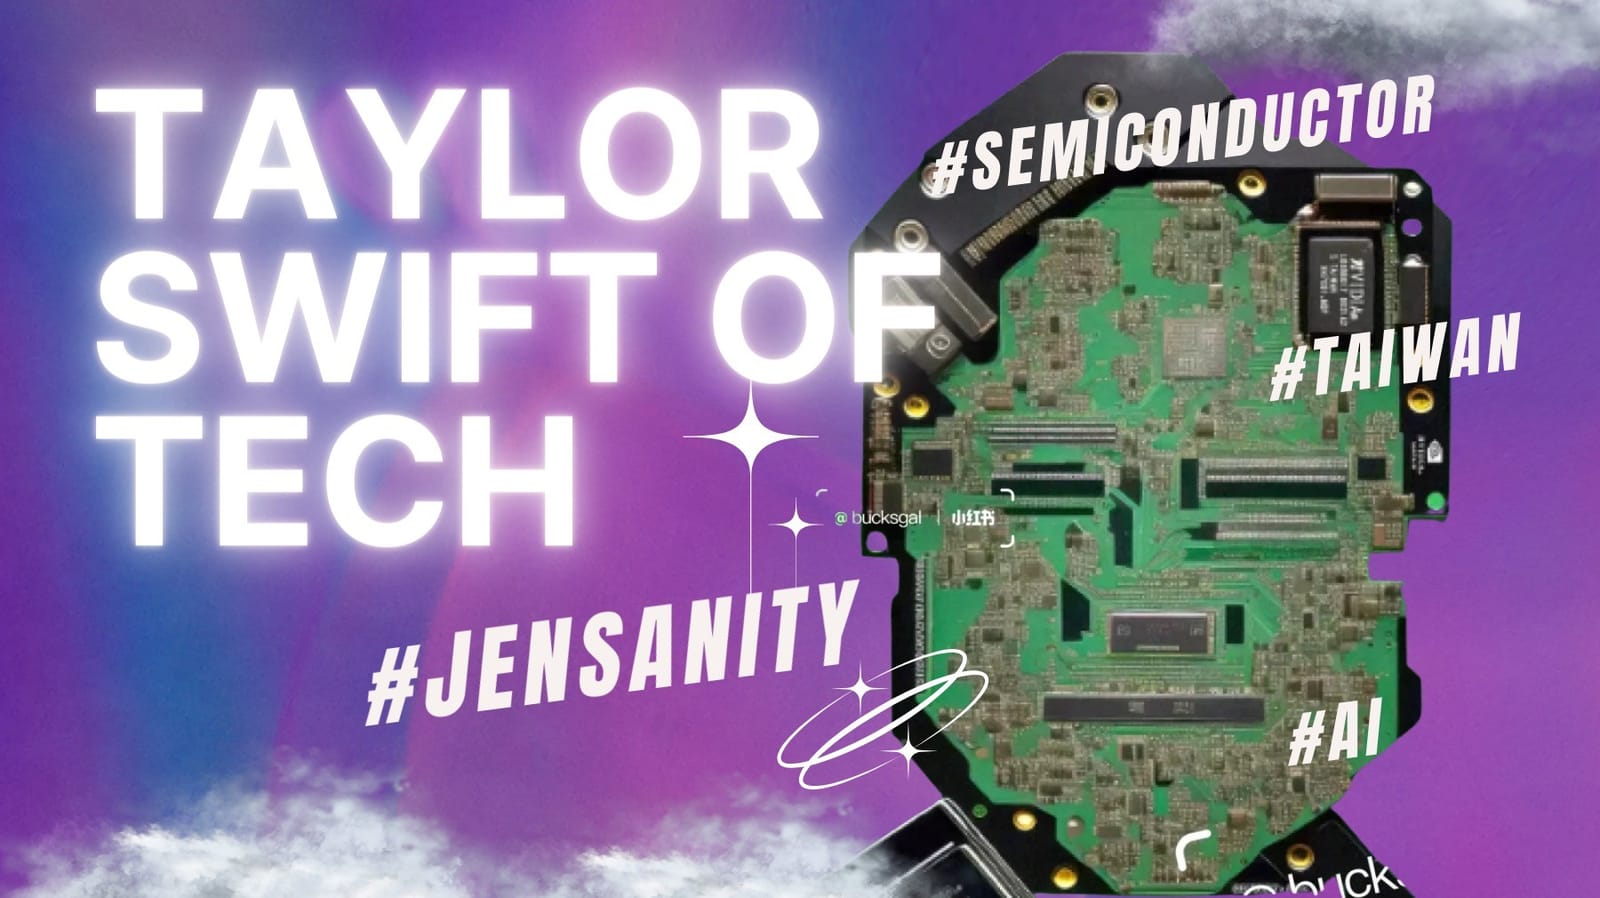 From Tech Titan to Tech Trendsetter? Why Jensen Huang is the 'Taylor Swift' of Tech